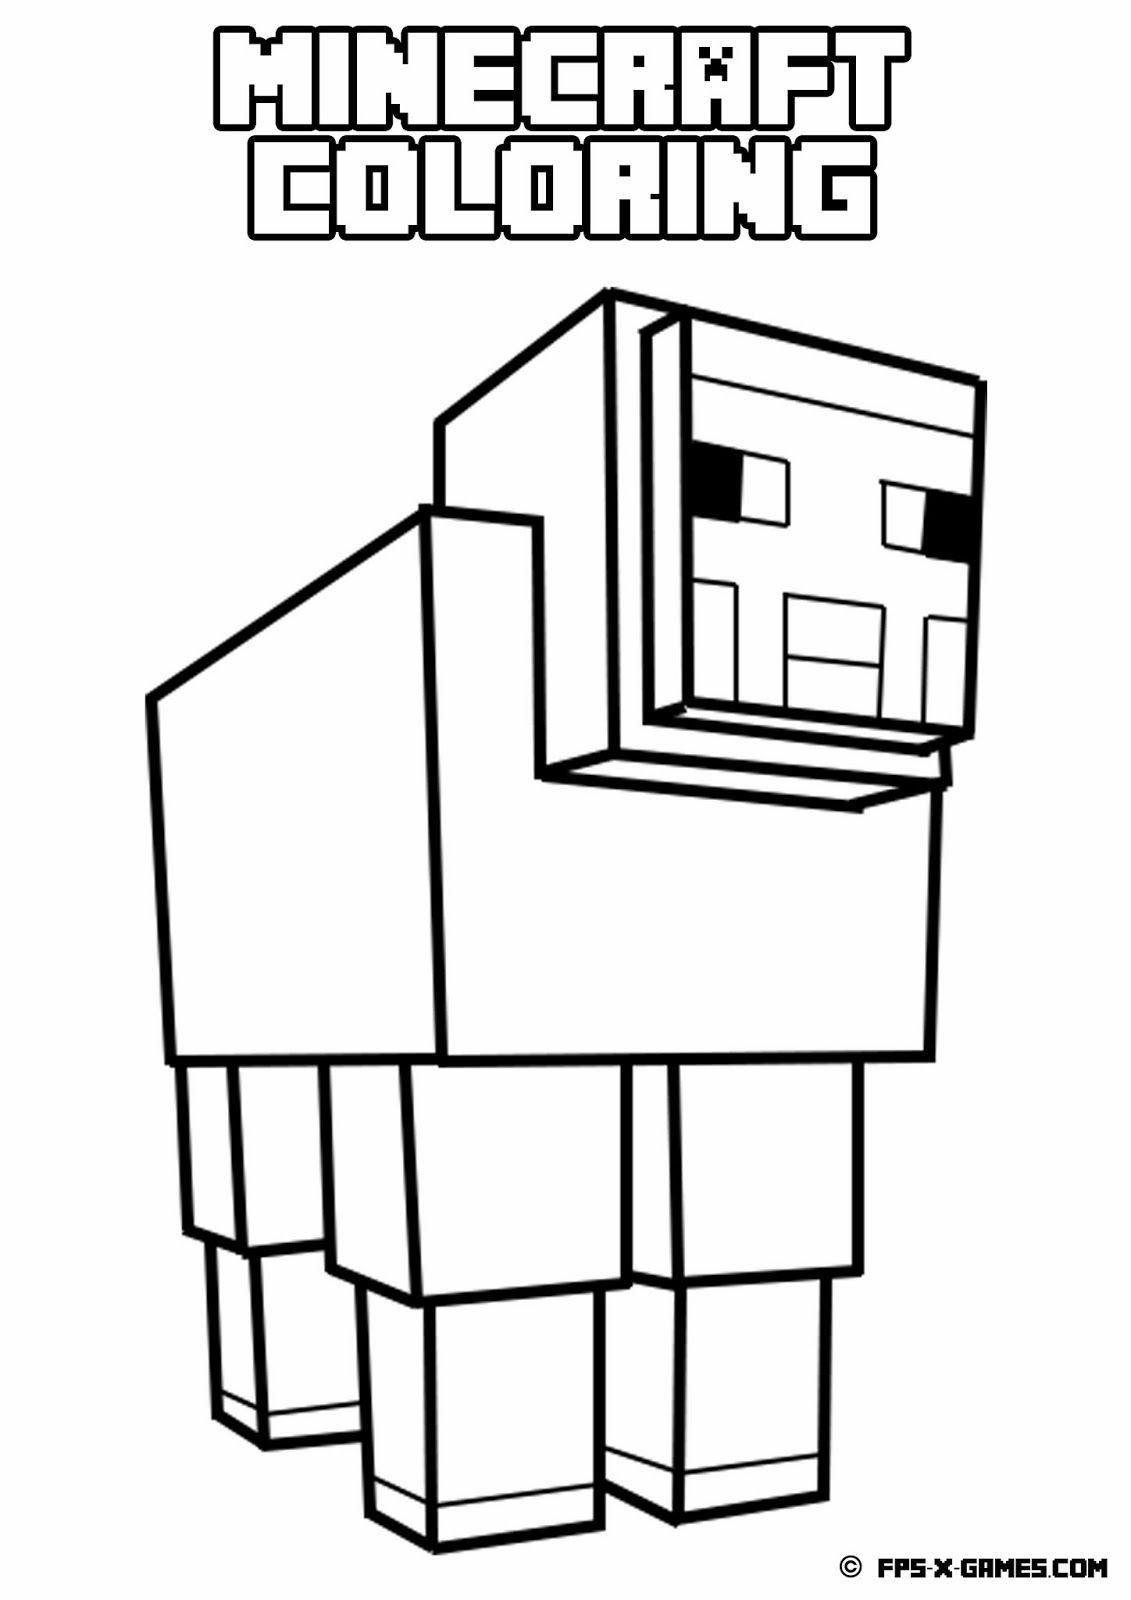 minecraft-coloring-page-10_jpg dans Minecraft coloring pages ...